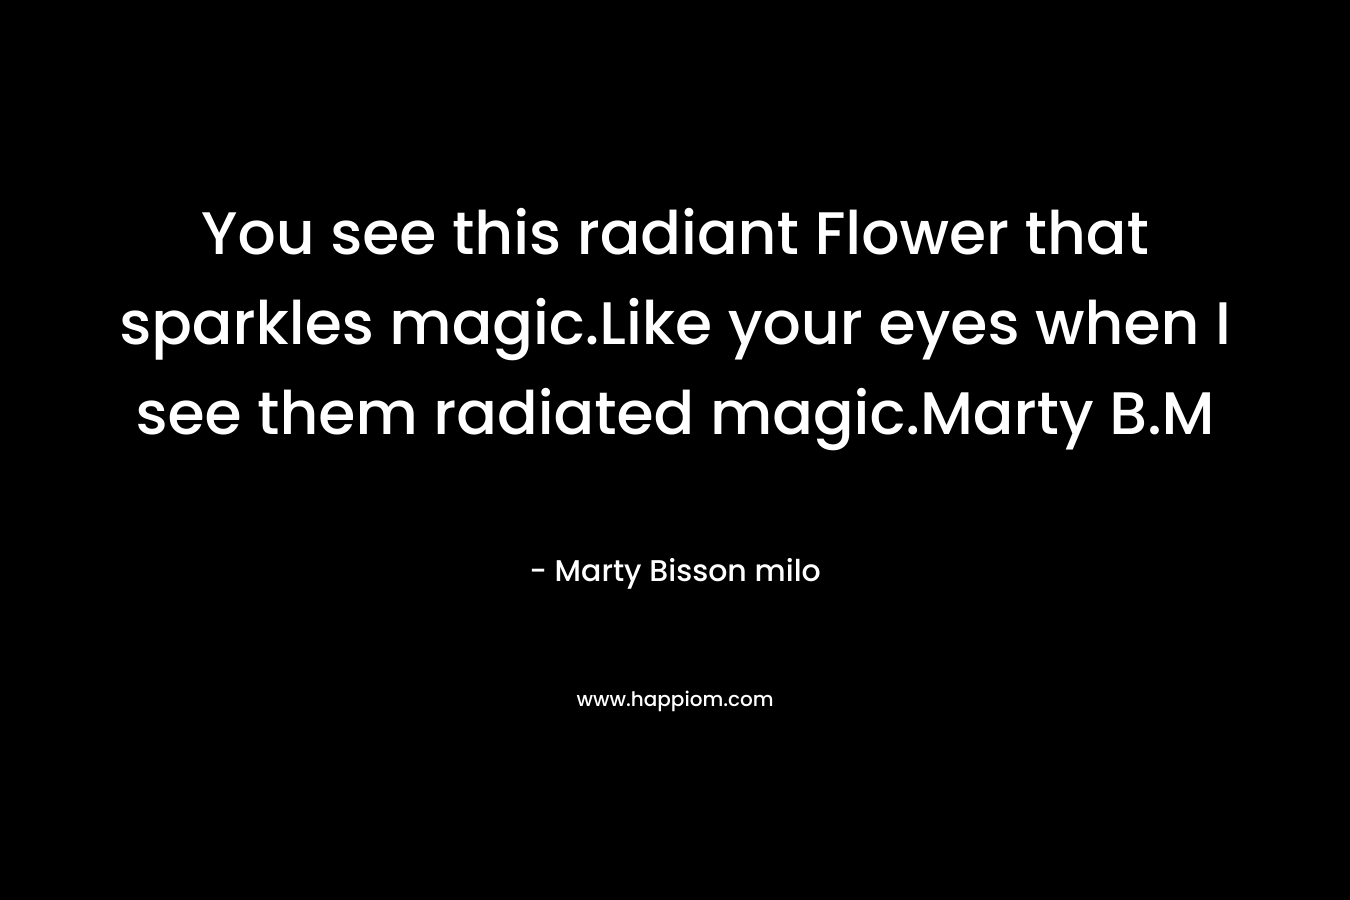 You see this radiant Flower that sparkles magic.Like your eyes when I see them radiated magic.Marty B.M